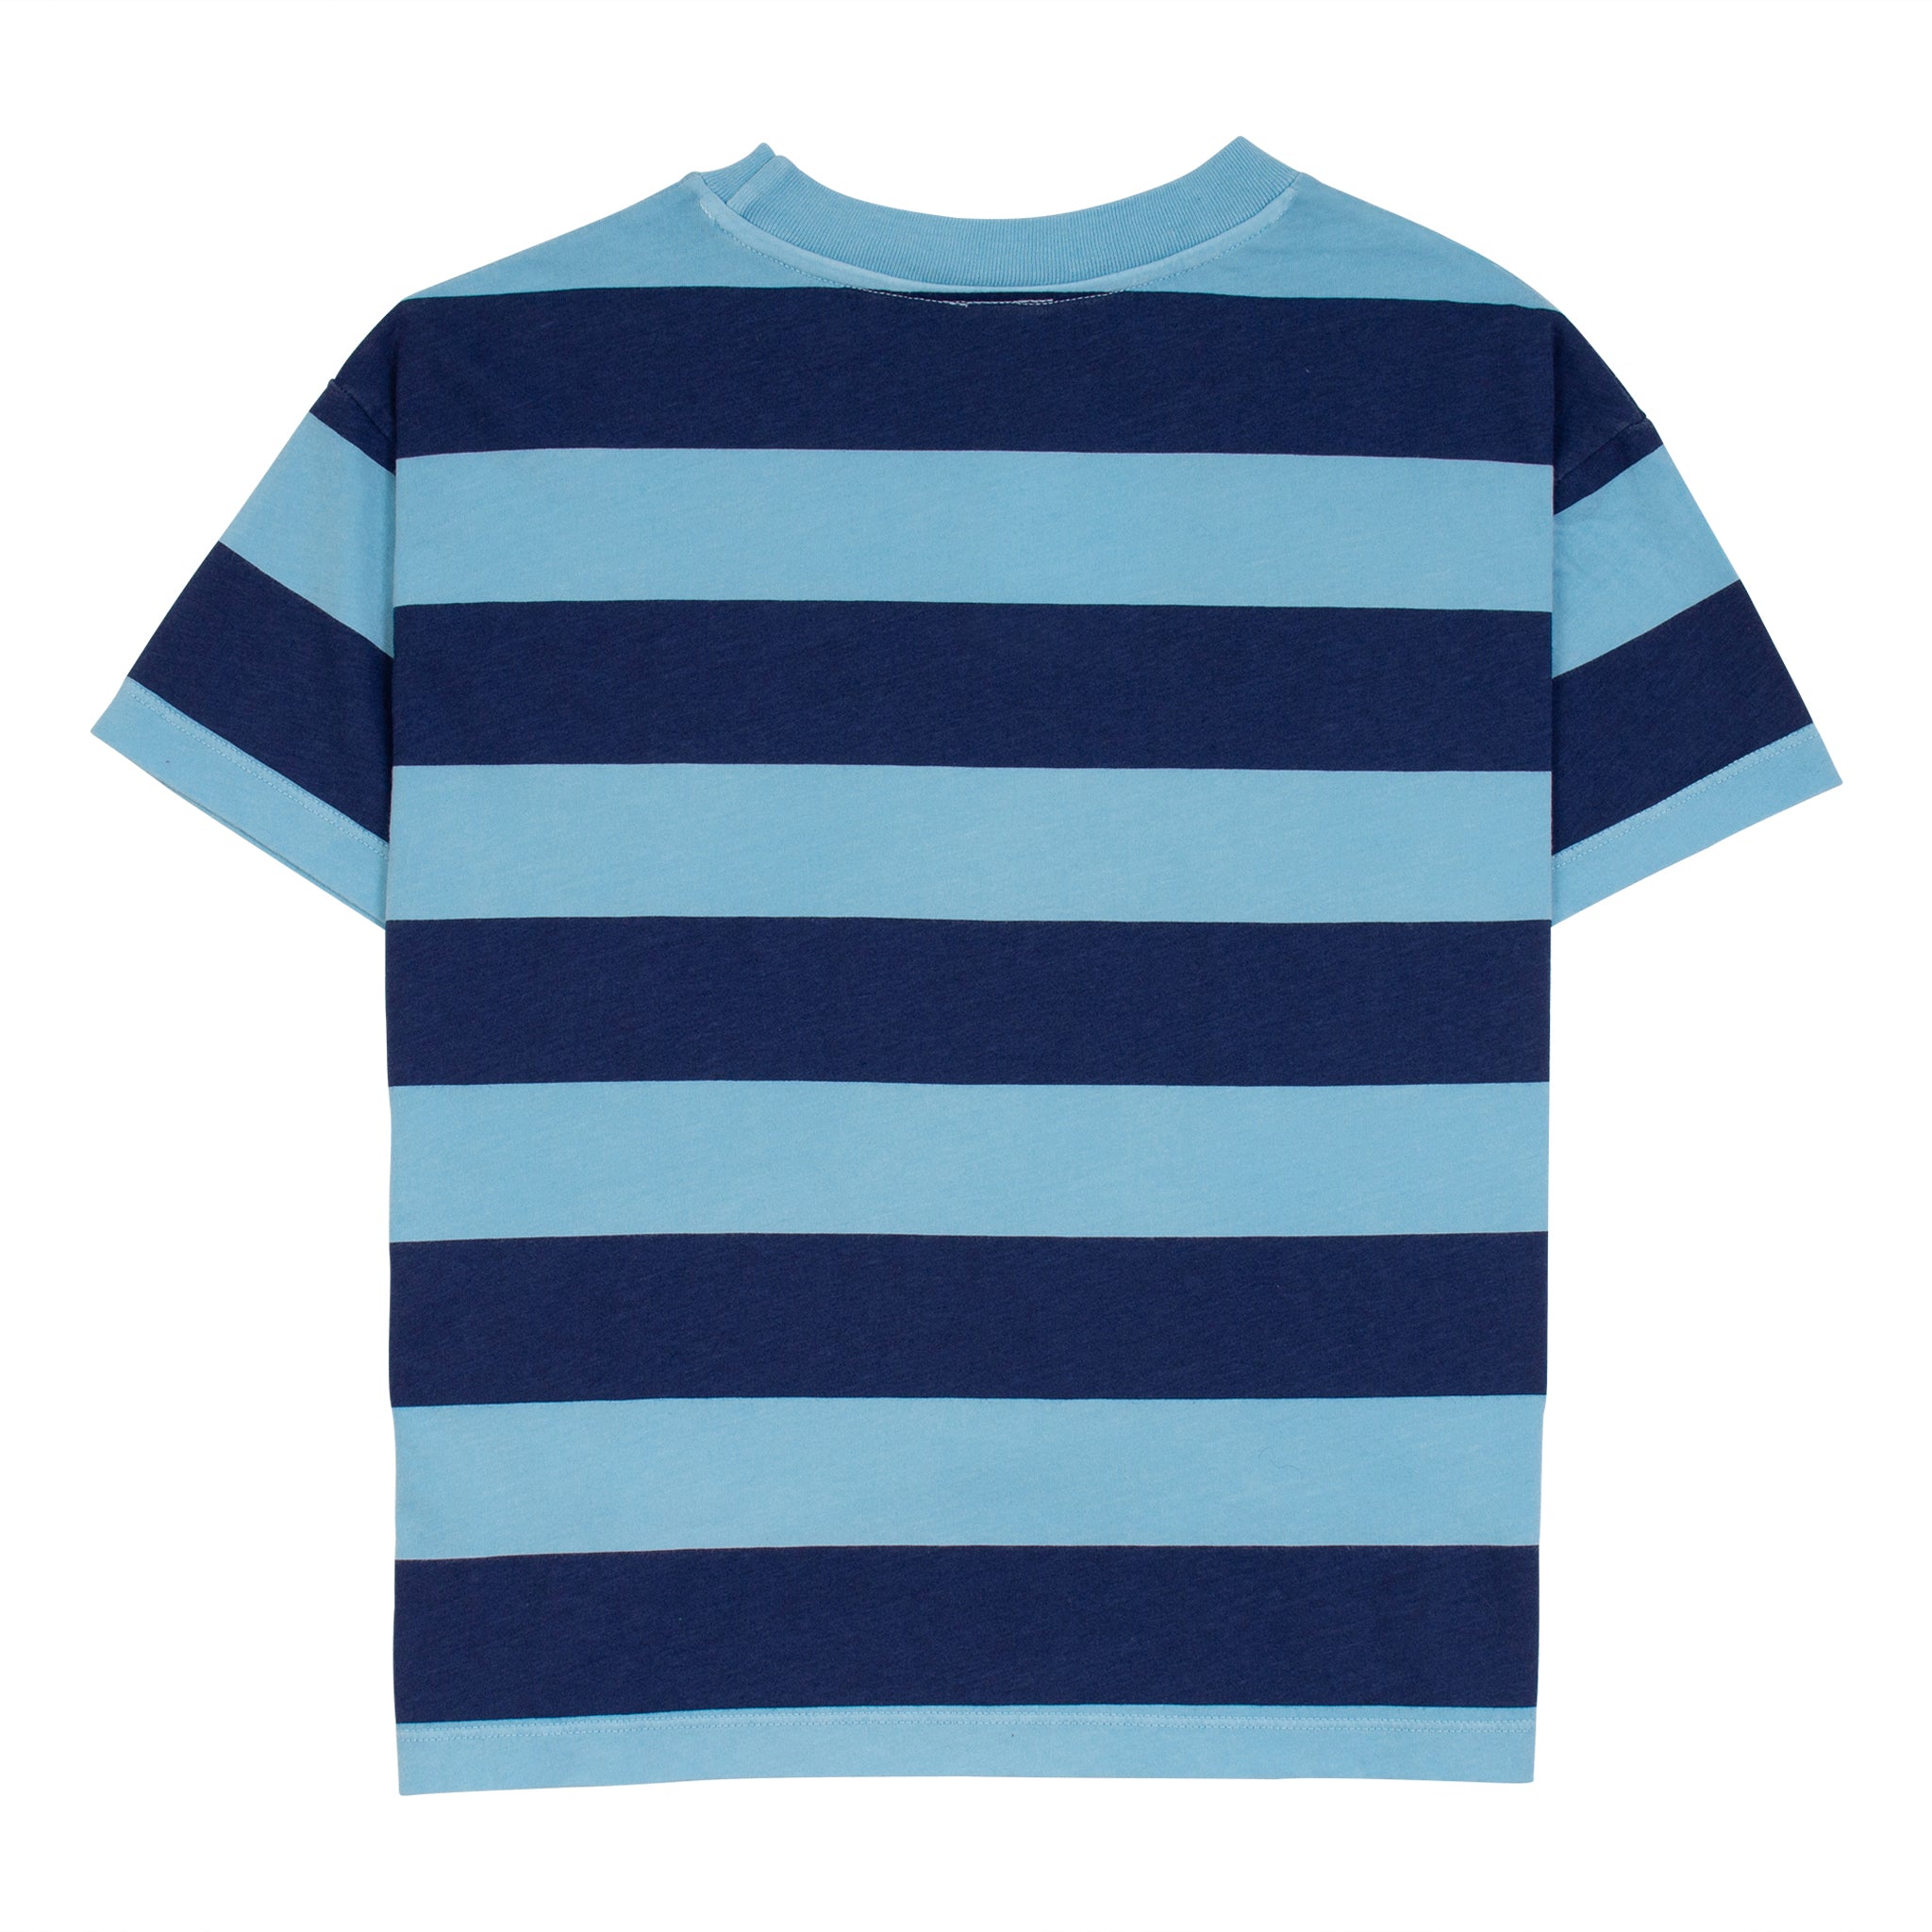 Wide Stripe Tee - Turquoise/Navy